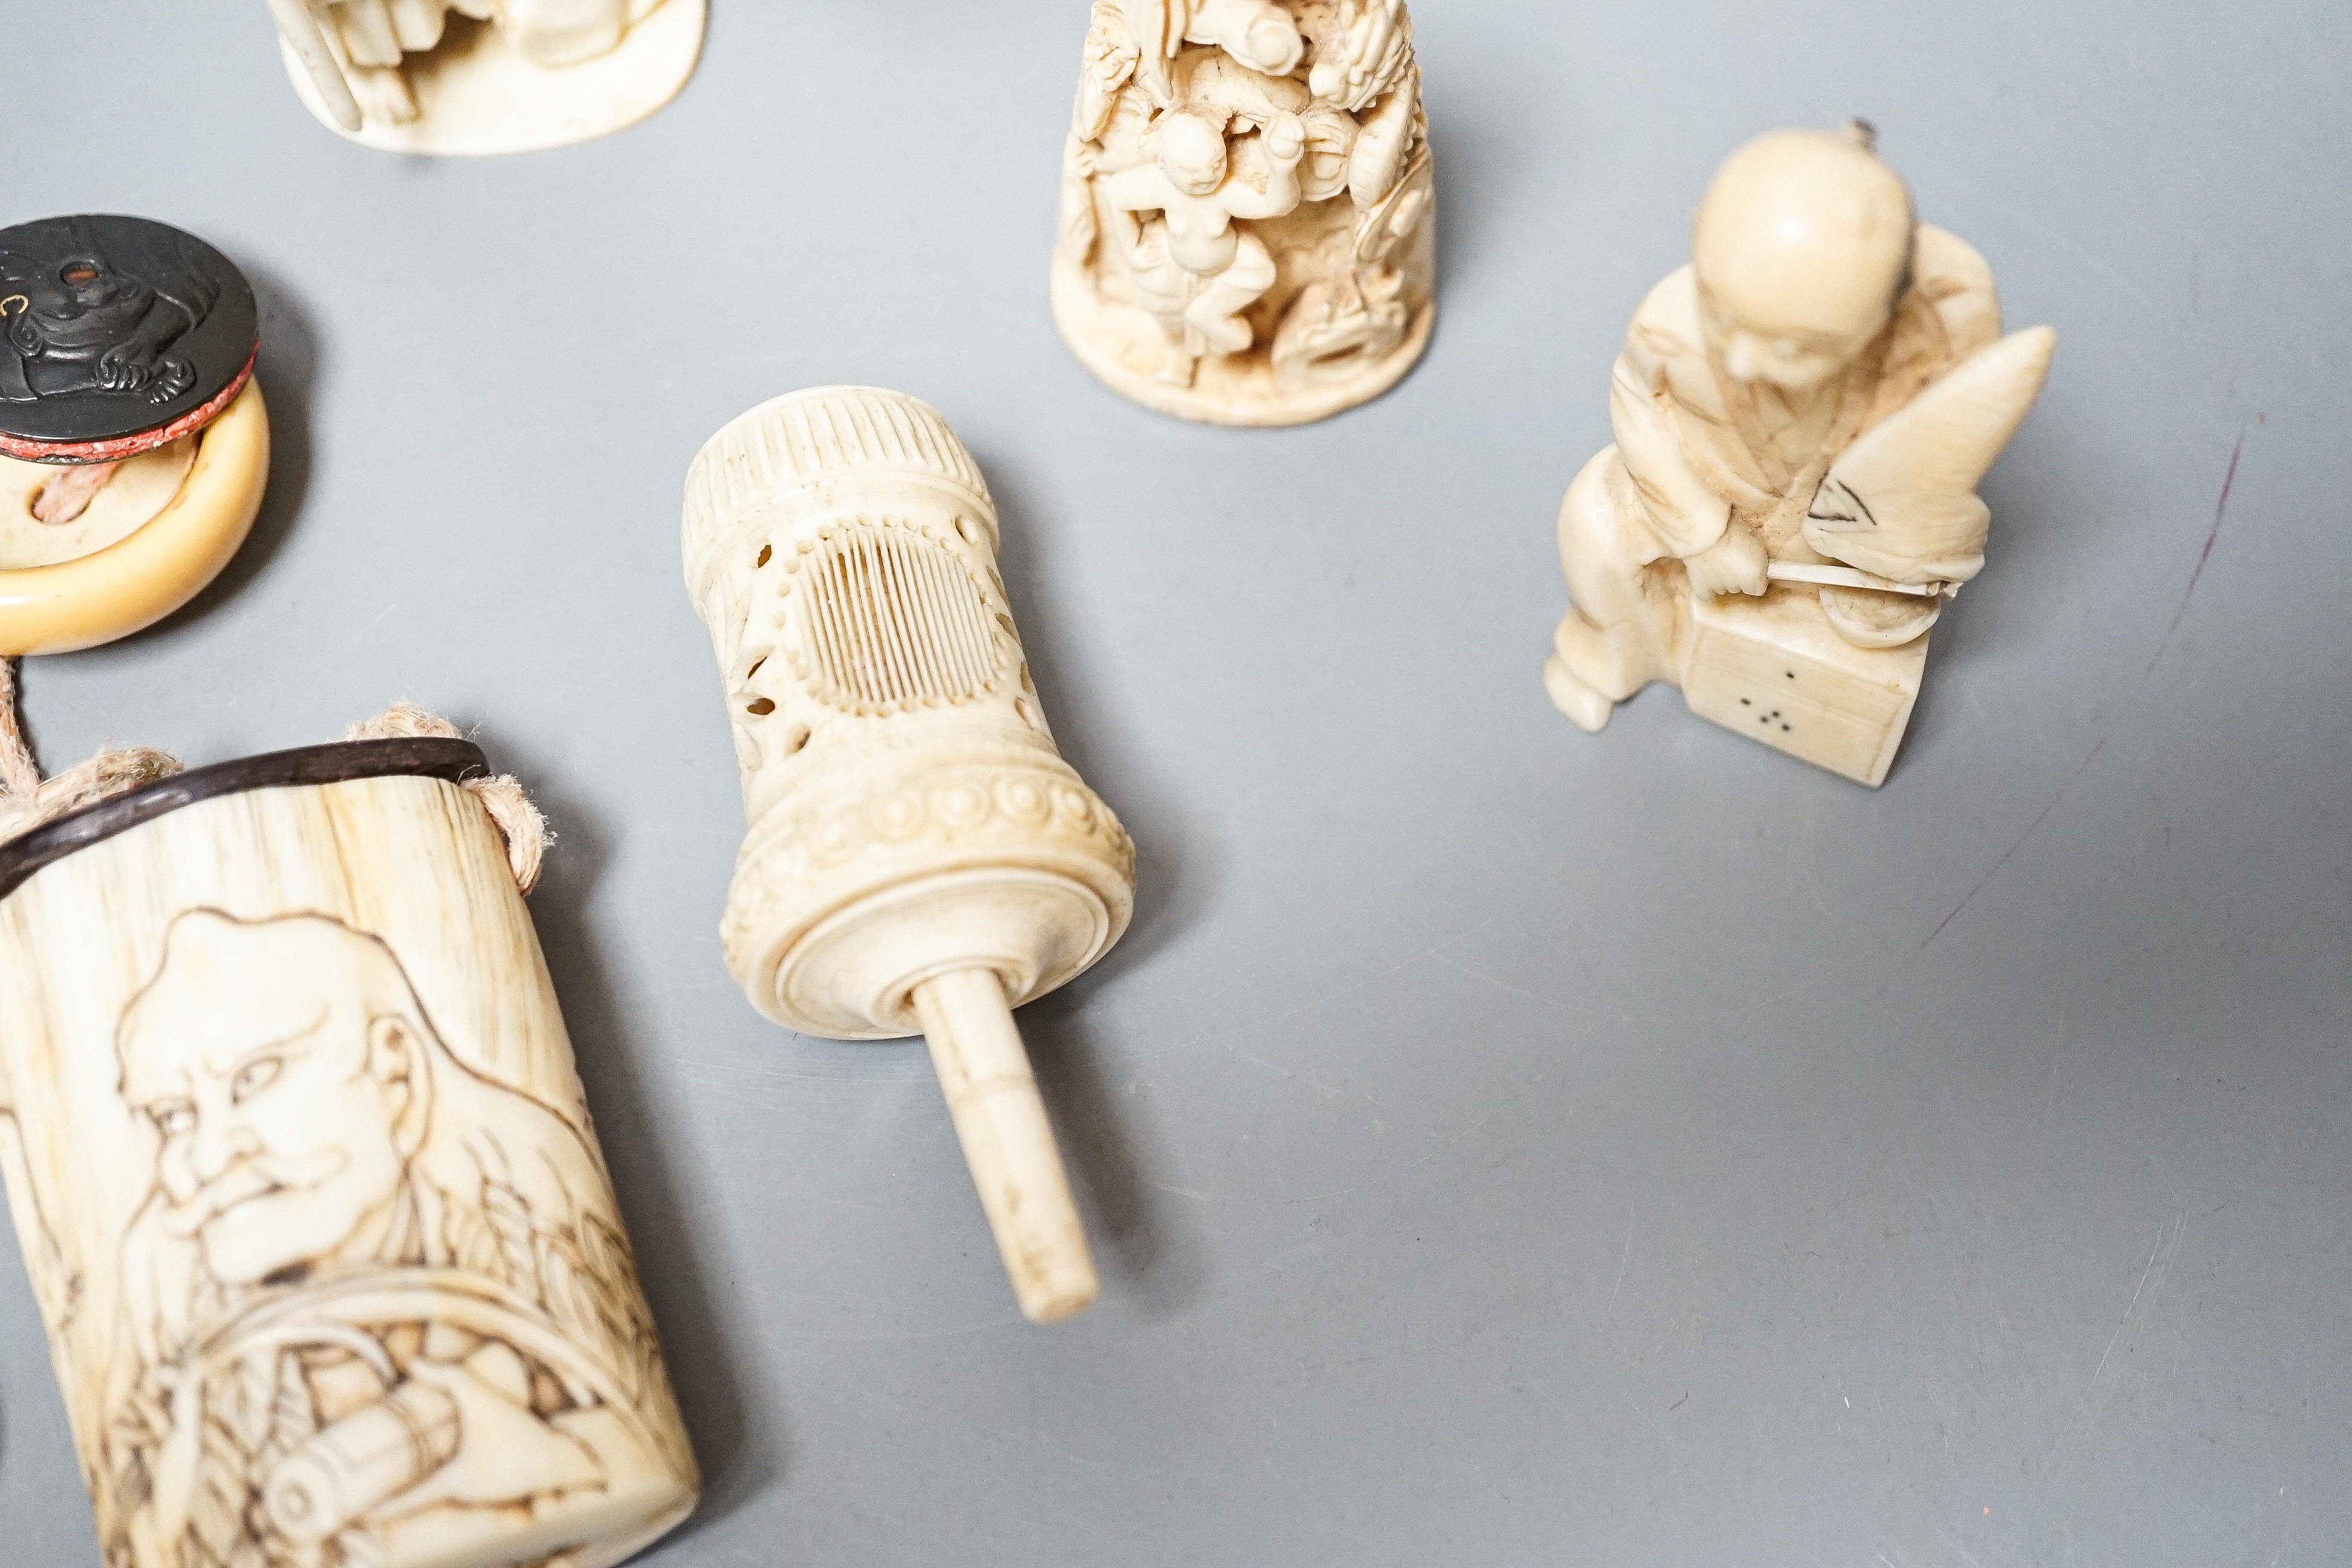 Three Japanese Ivory figures of men, a similar bezique marker, a Japanese staghorn single section inro with ivory manju, a Chinese ivory carving and a bone needlework container